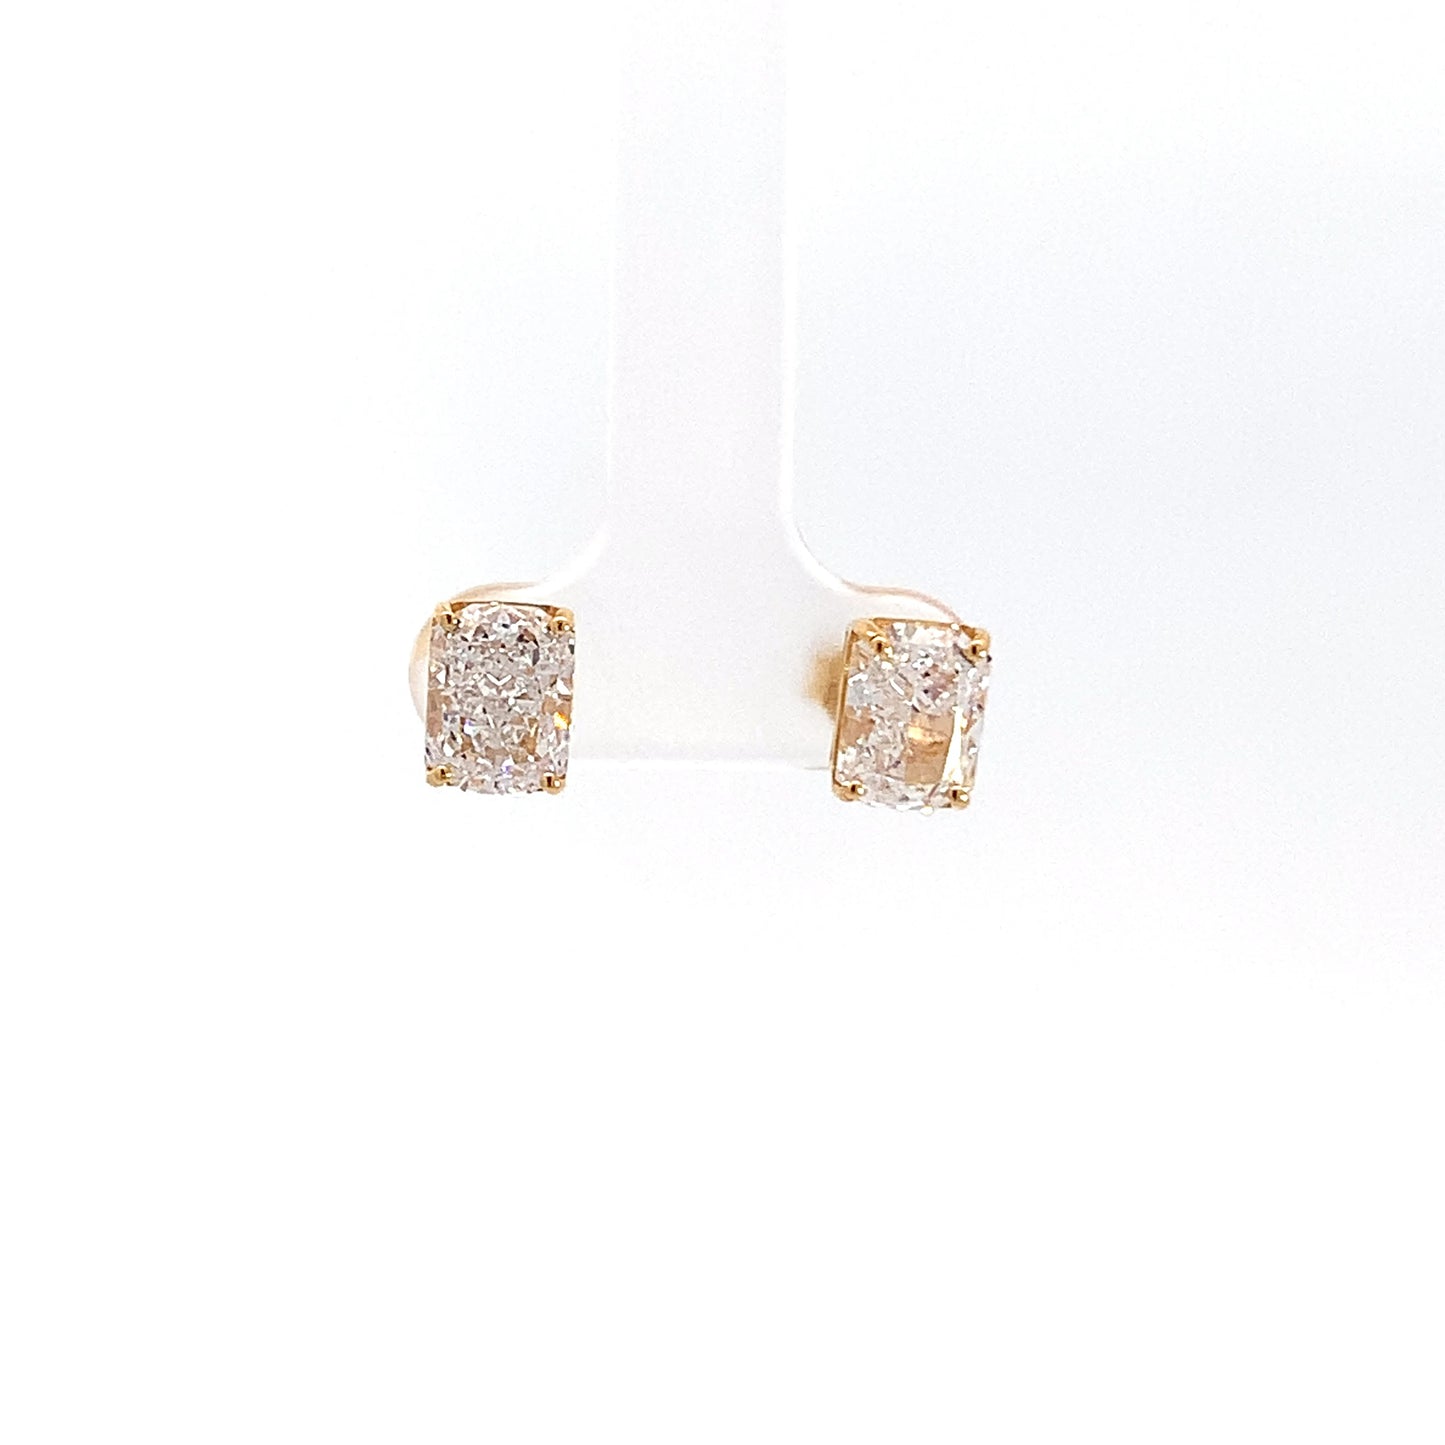 18k Crushed ice solitaire Stud Earrings